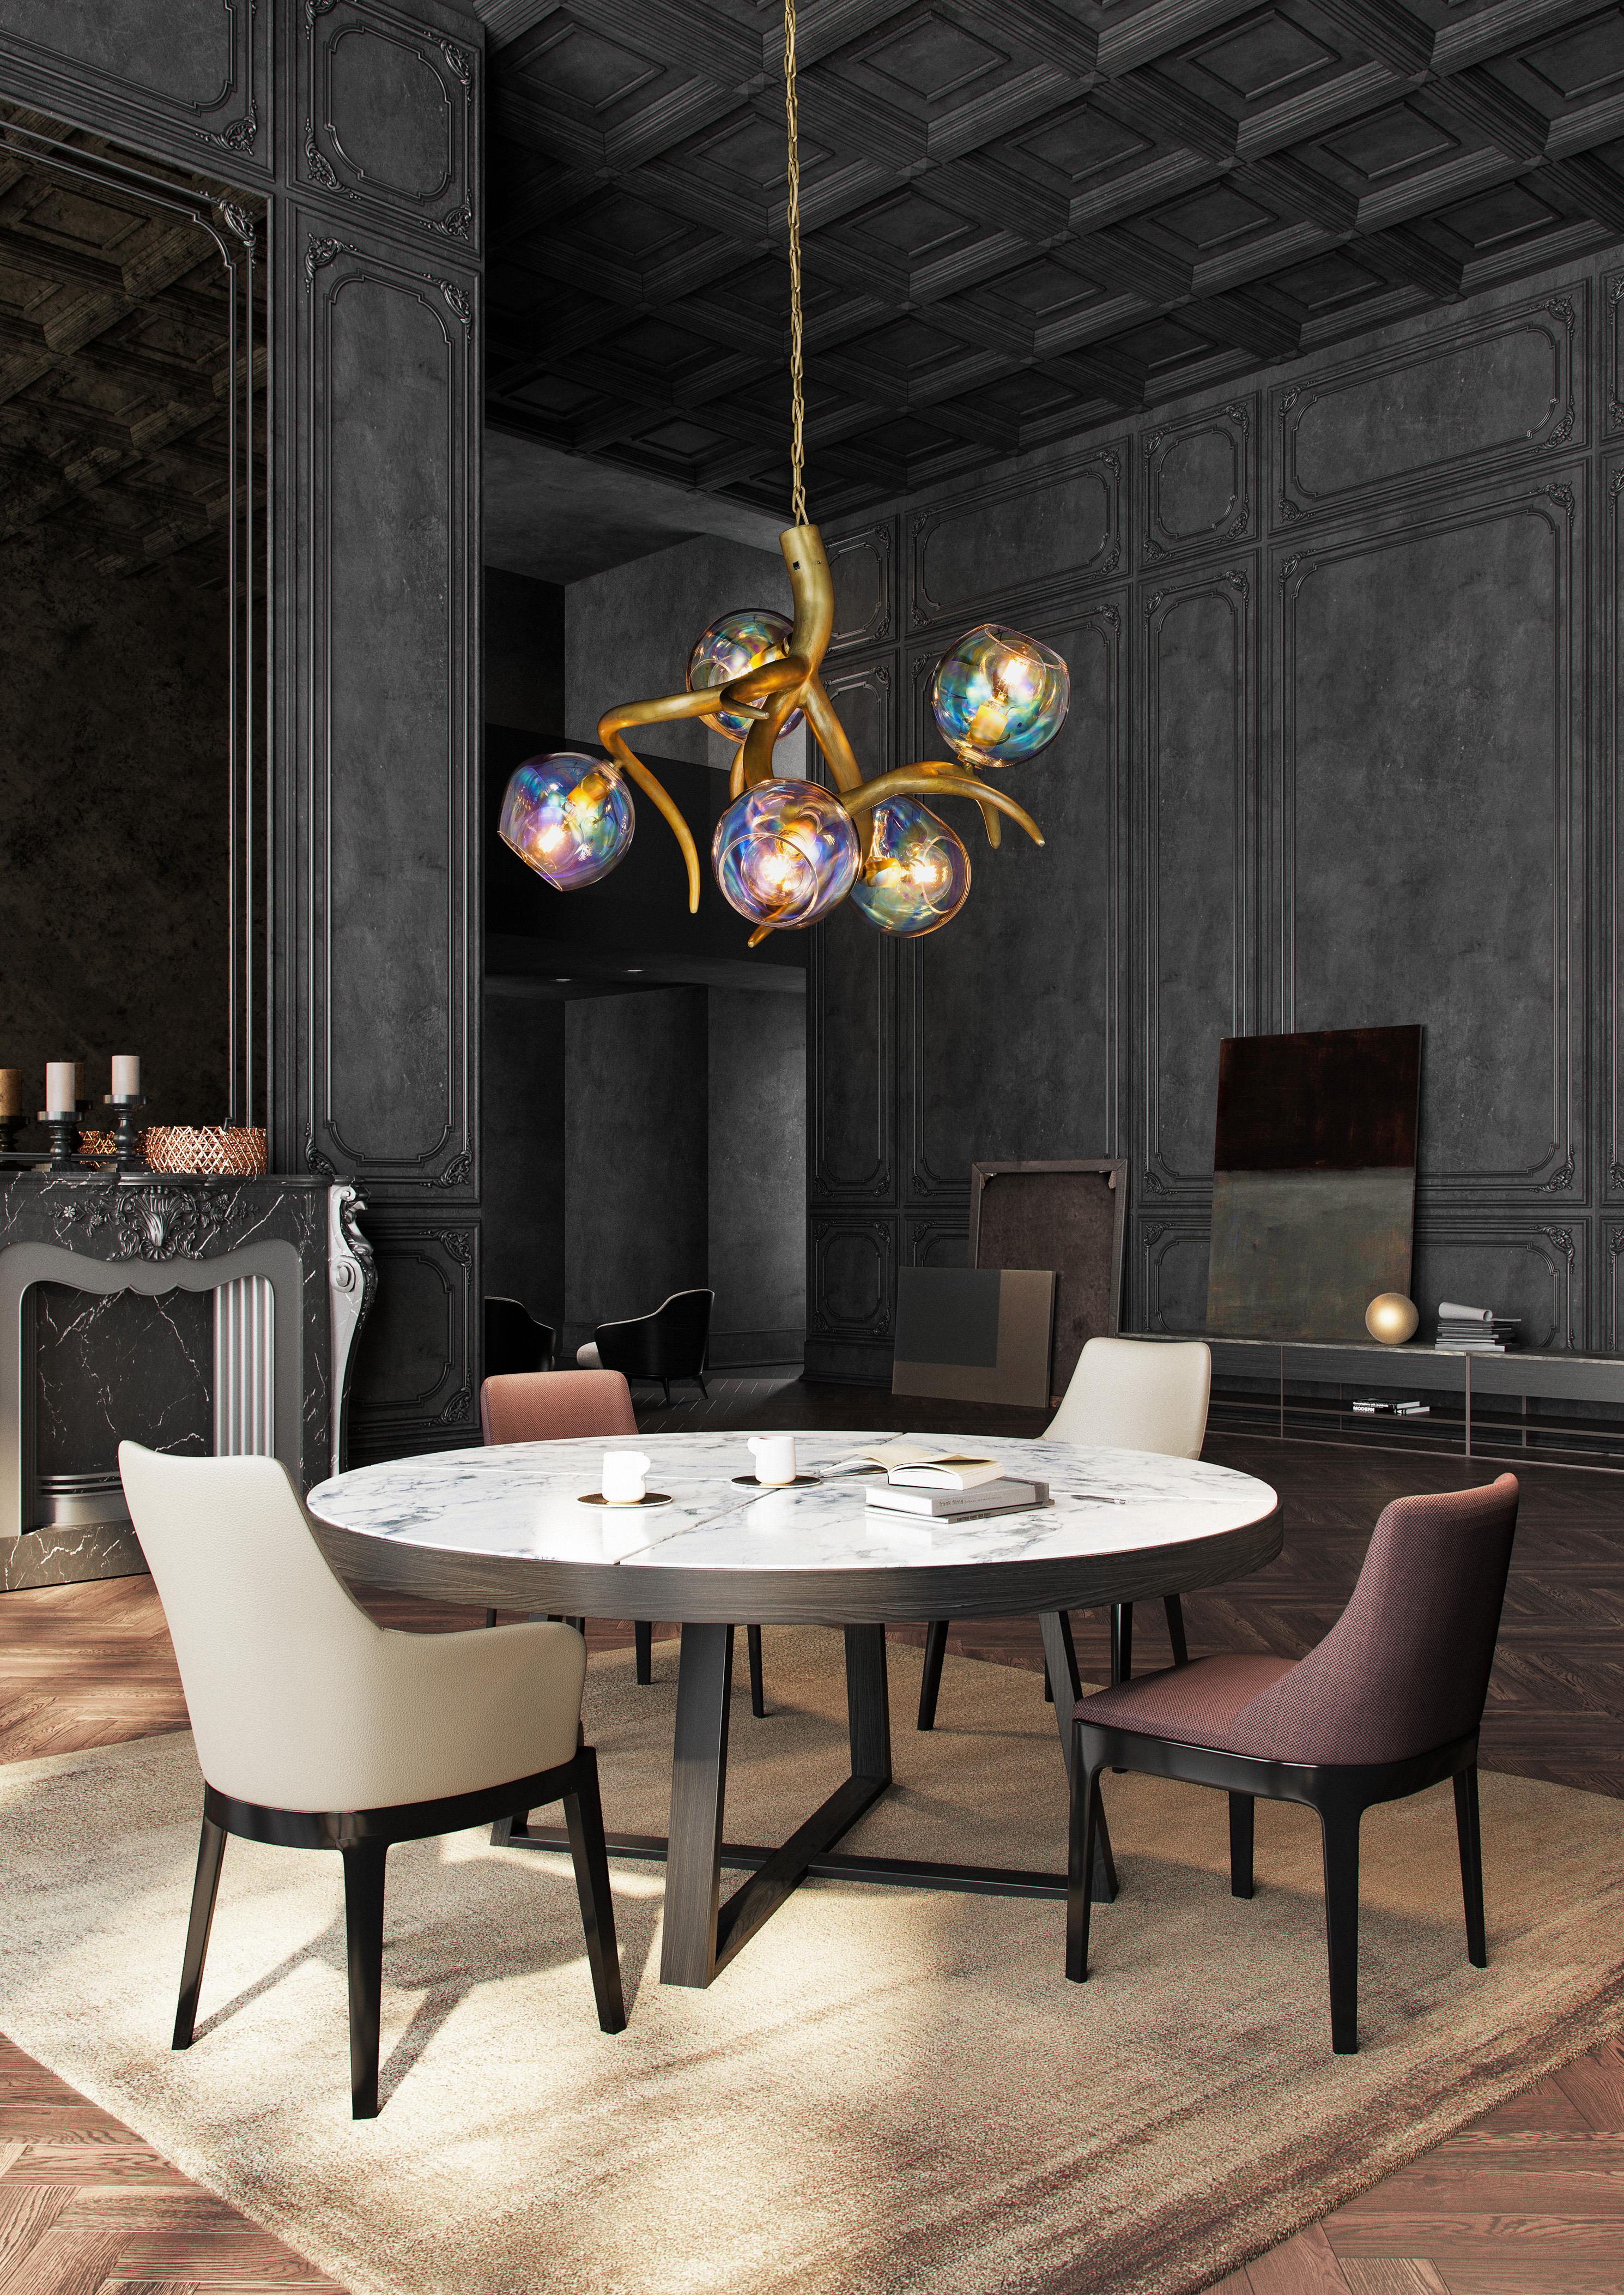 The Ersa, a modern chandelier in a brass burnished finish with iridescent glass spheres, is designed by William Brand, founder of Brand van Egmond. Crafted by hand in the atelier of Brand van Egmond, the chandelier is available in three different